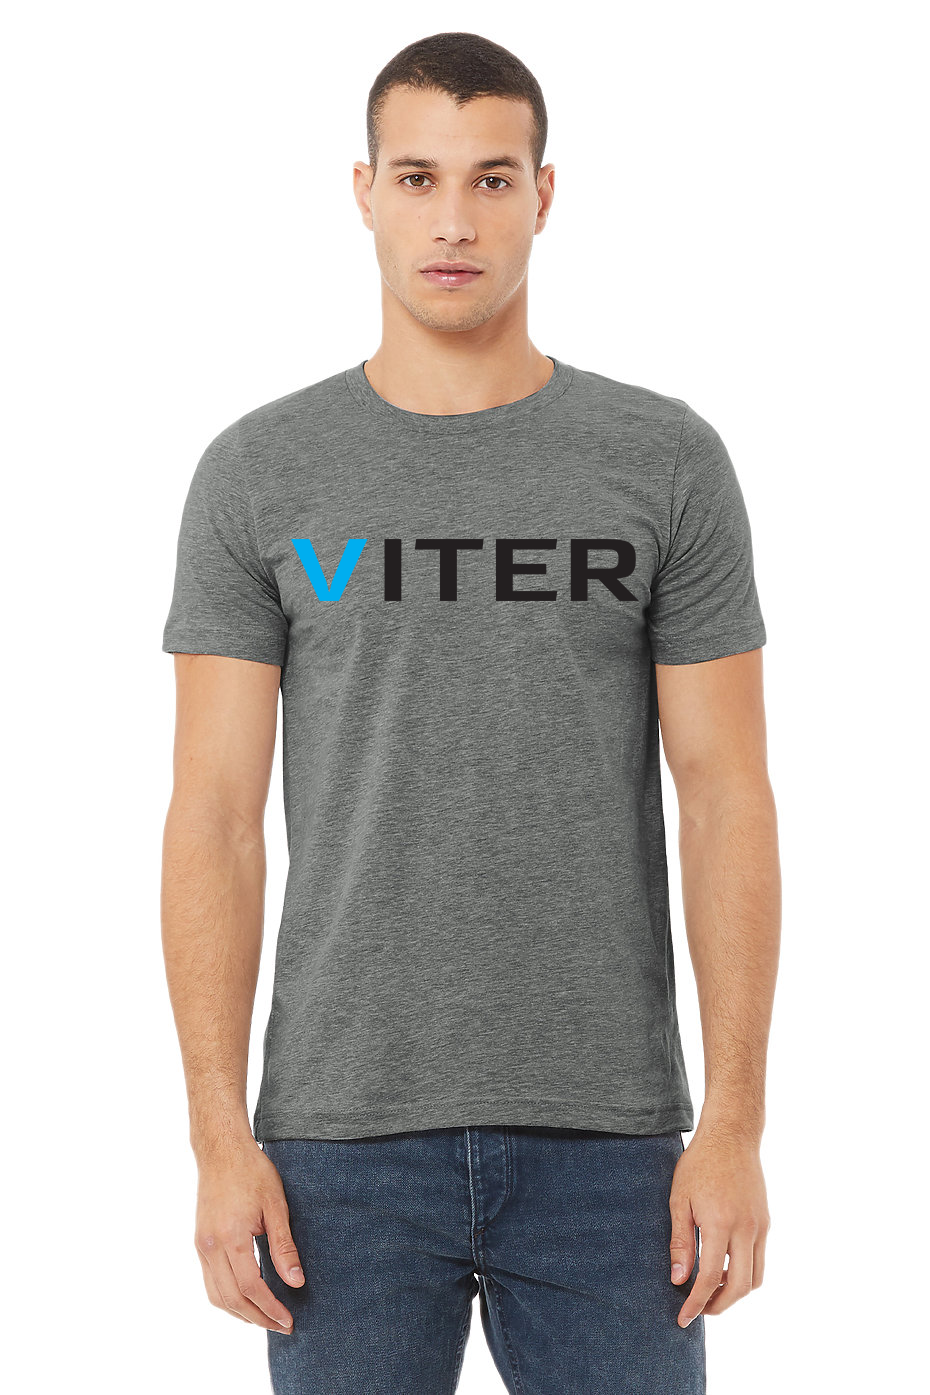 Pre-Order the Viter Energy T-Shirt - ***Shipping mid-July***